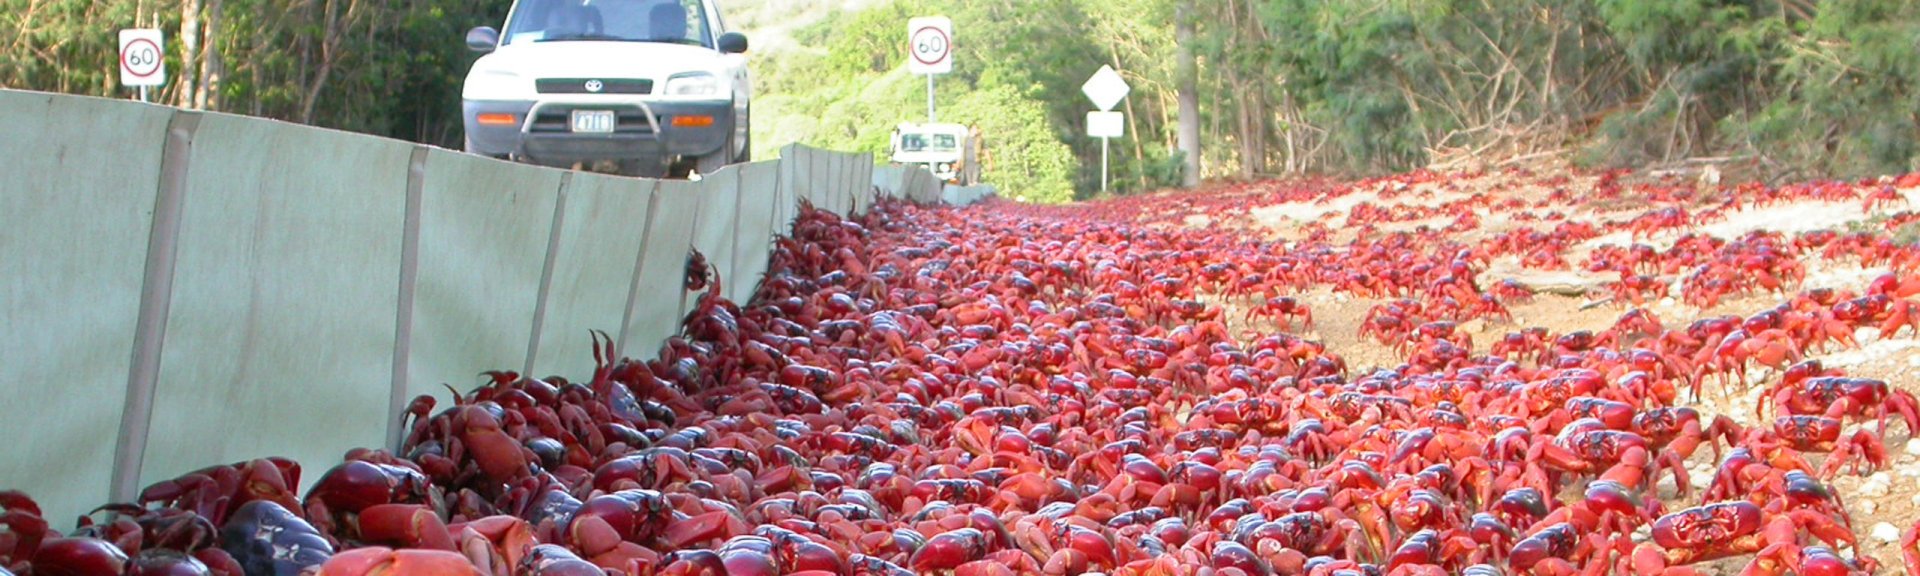 Red crab migration on Christmas Island